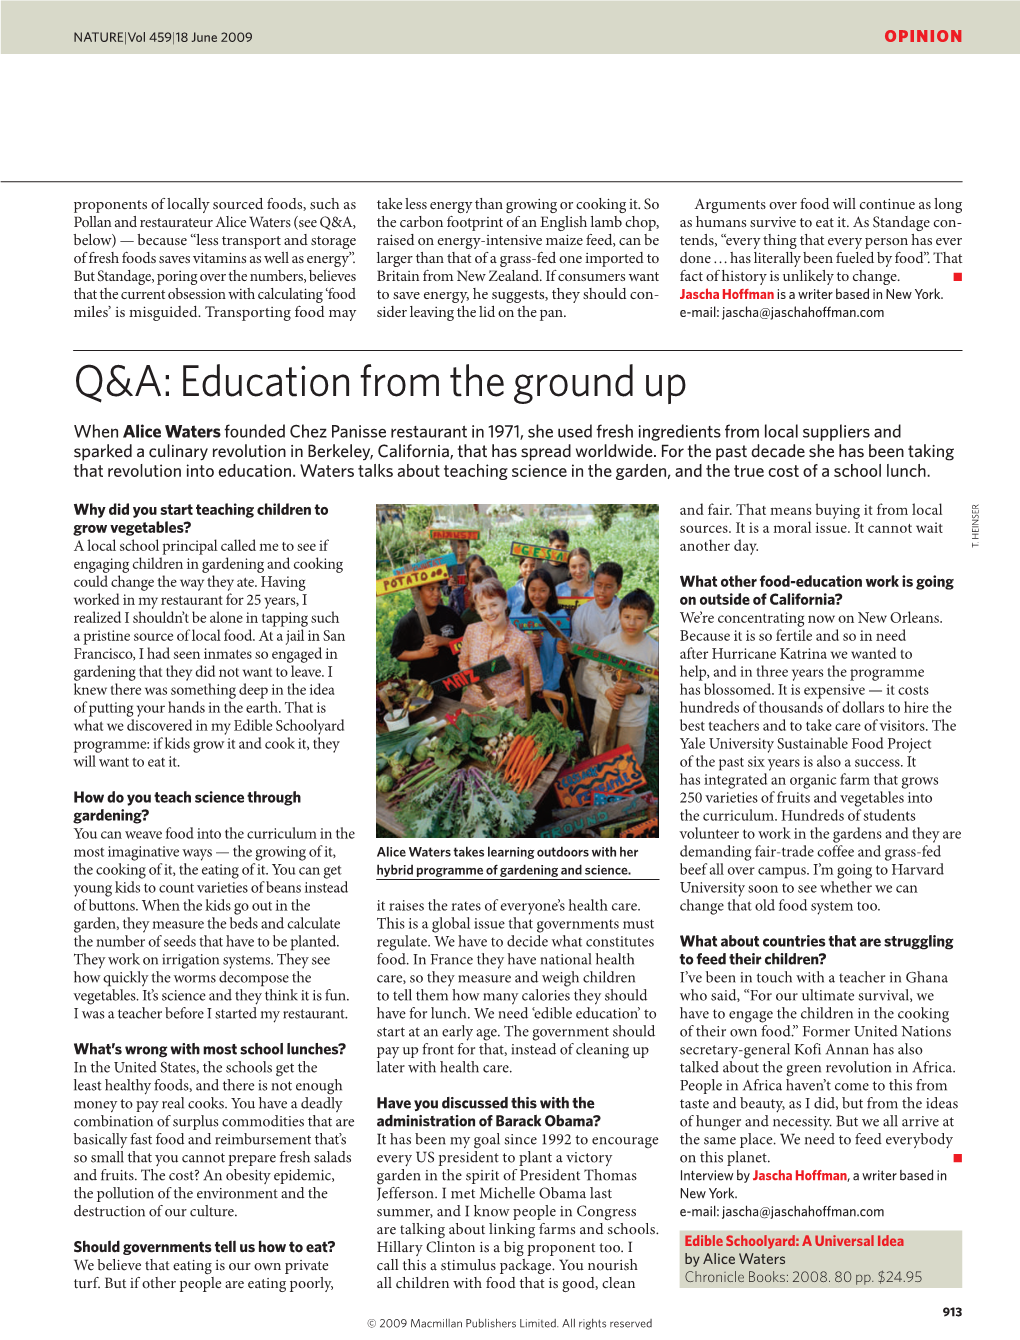 Q&A: Education from the Ground Up